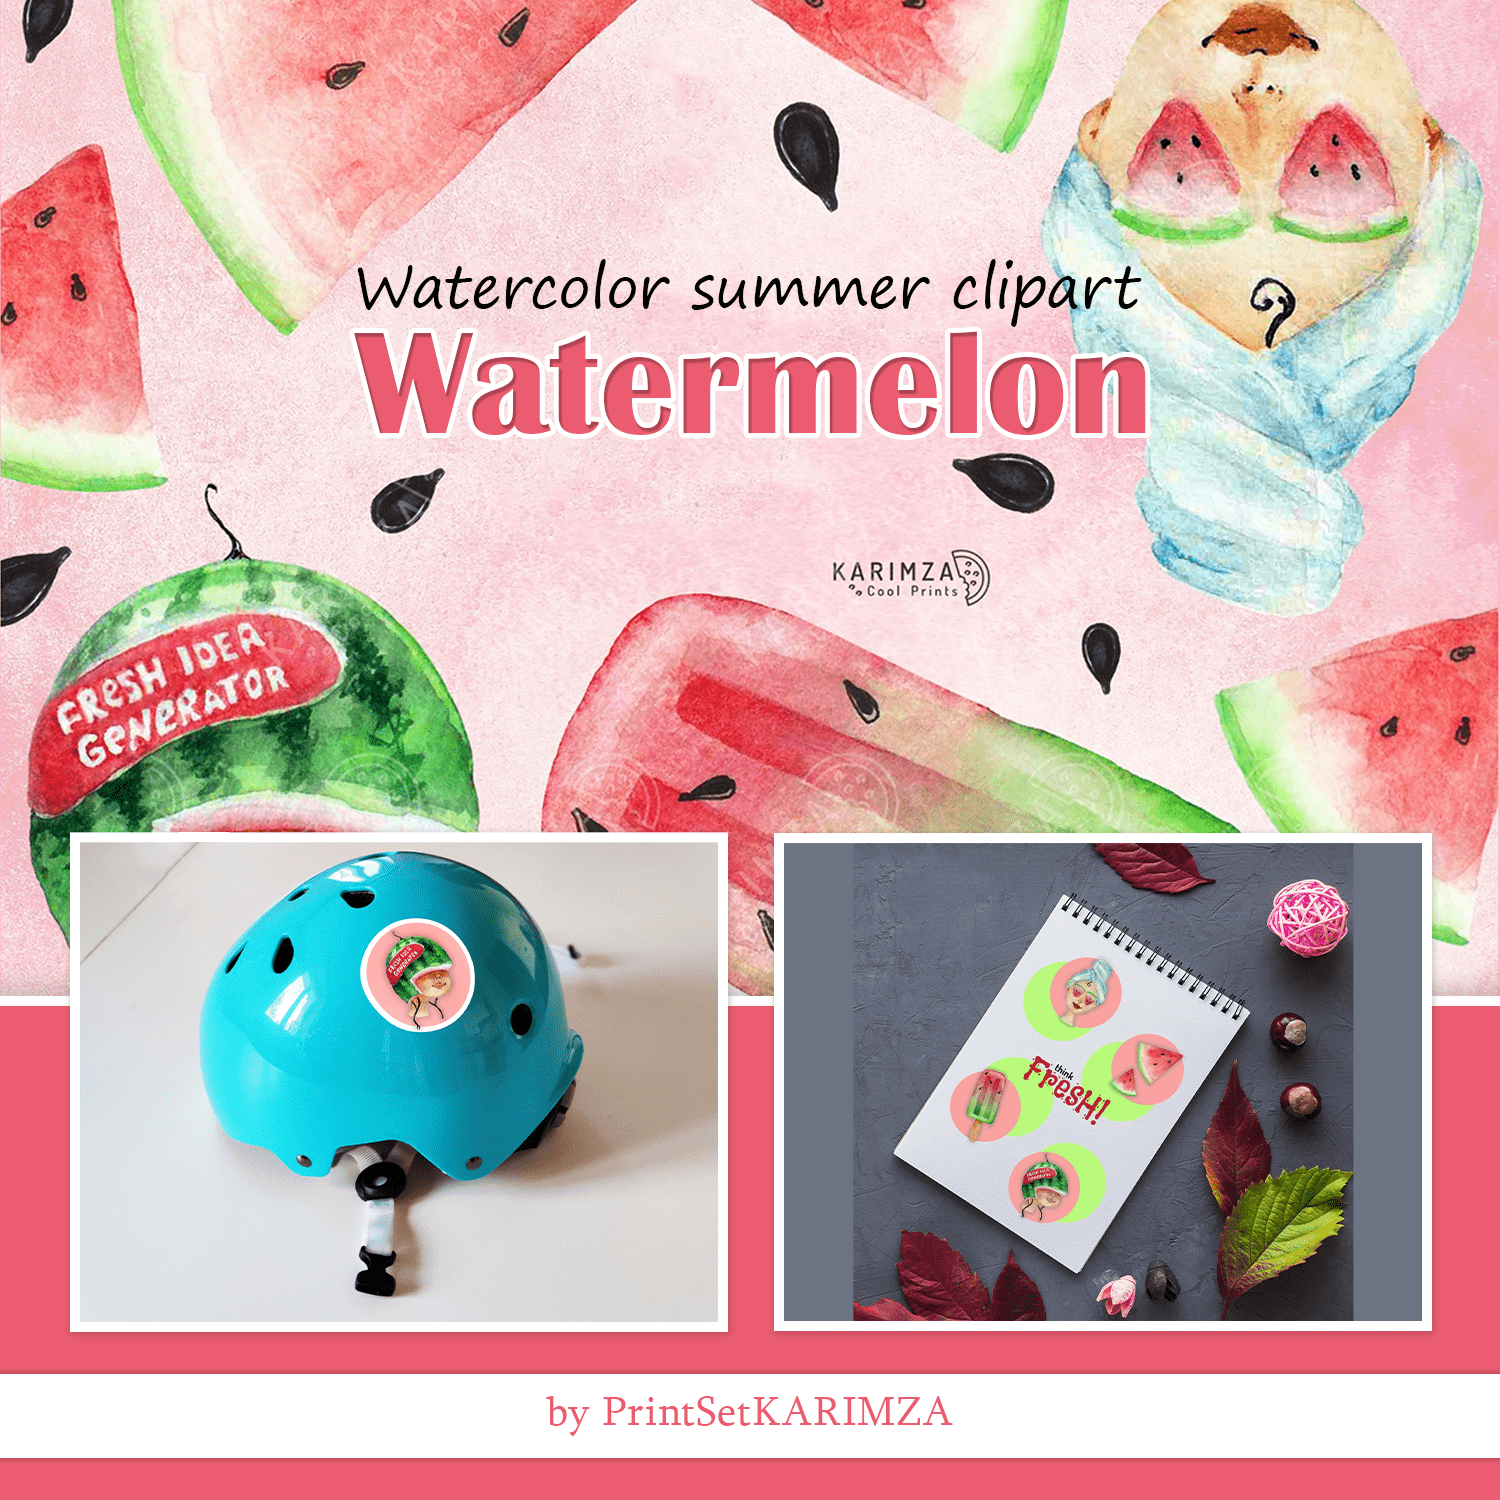 Watercolor summer clipart - main image preview.